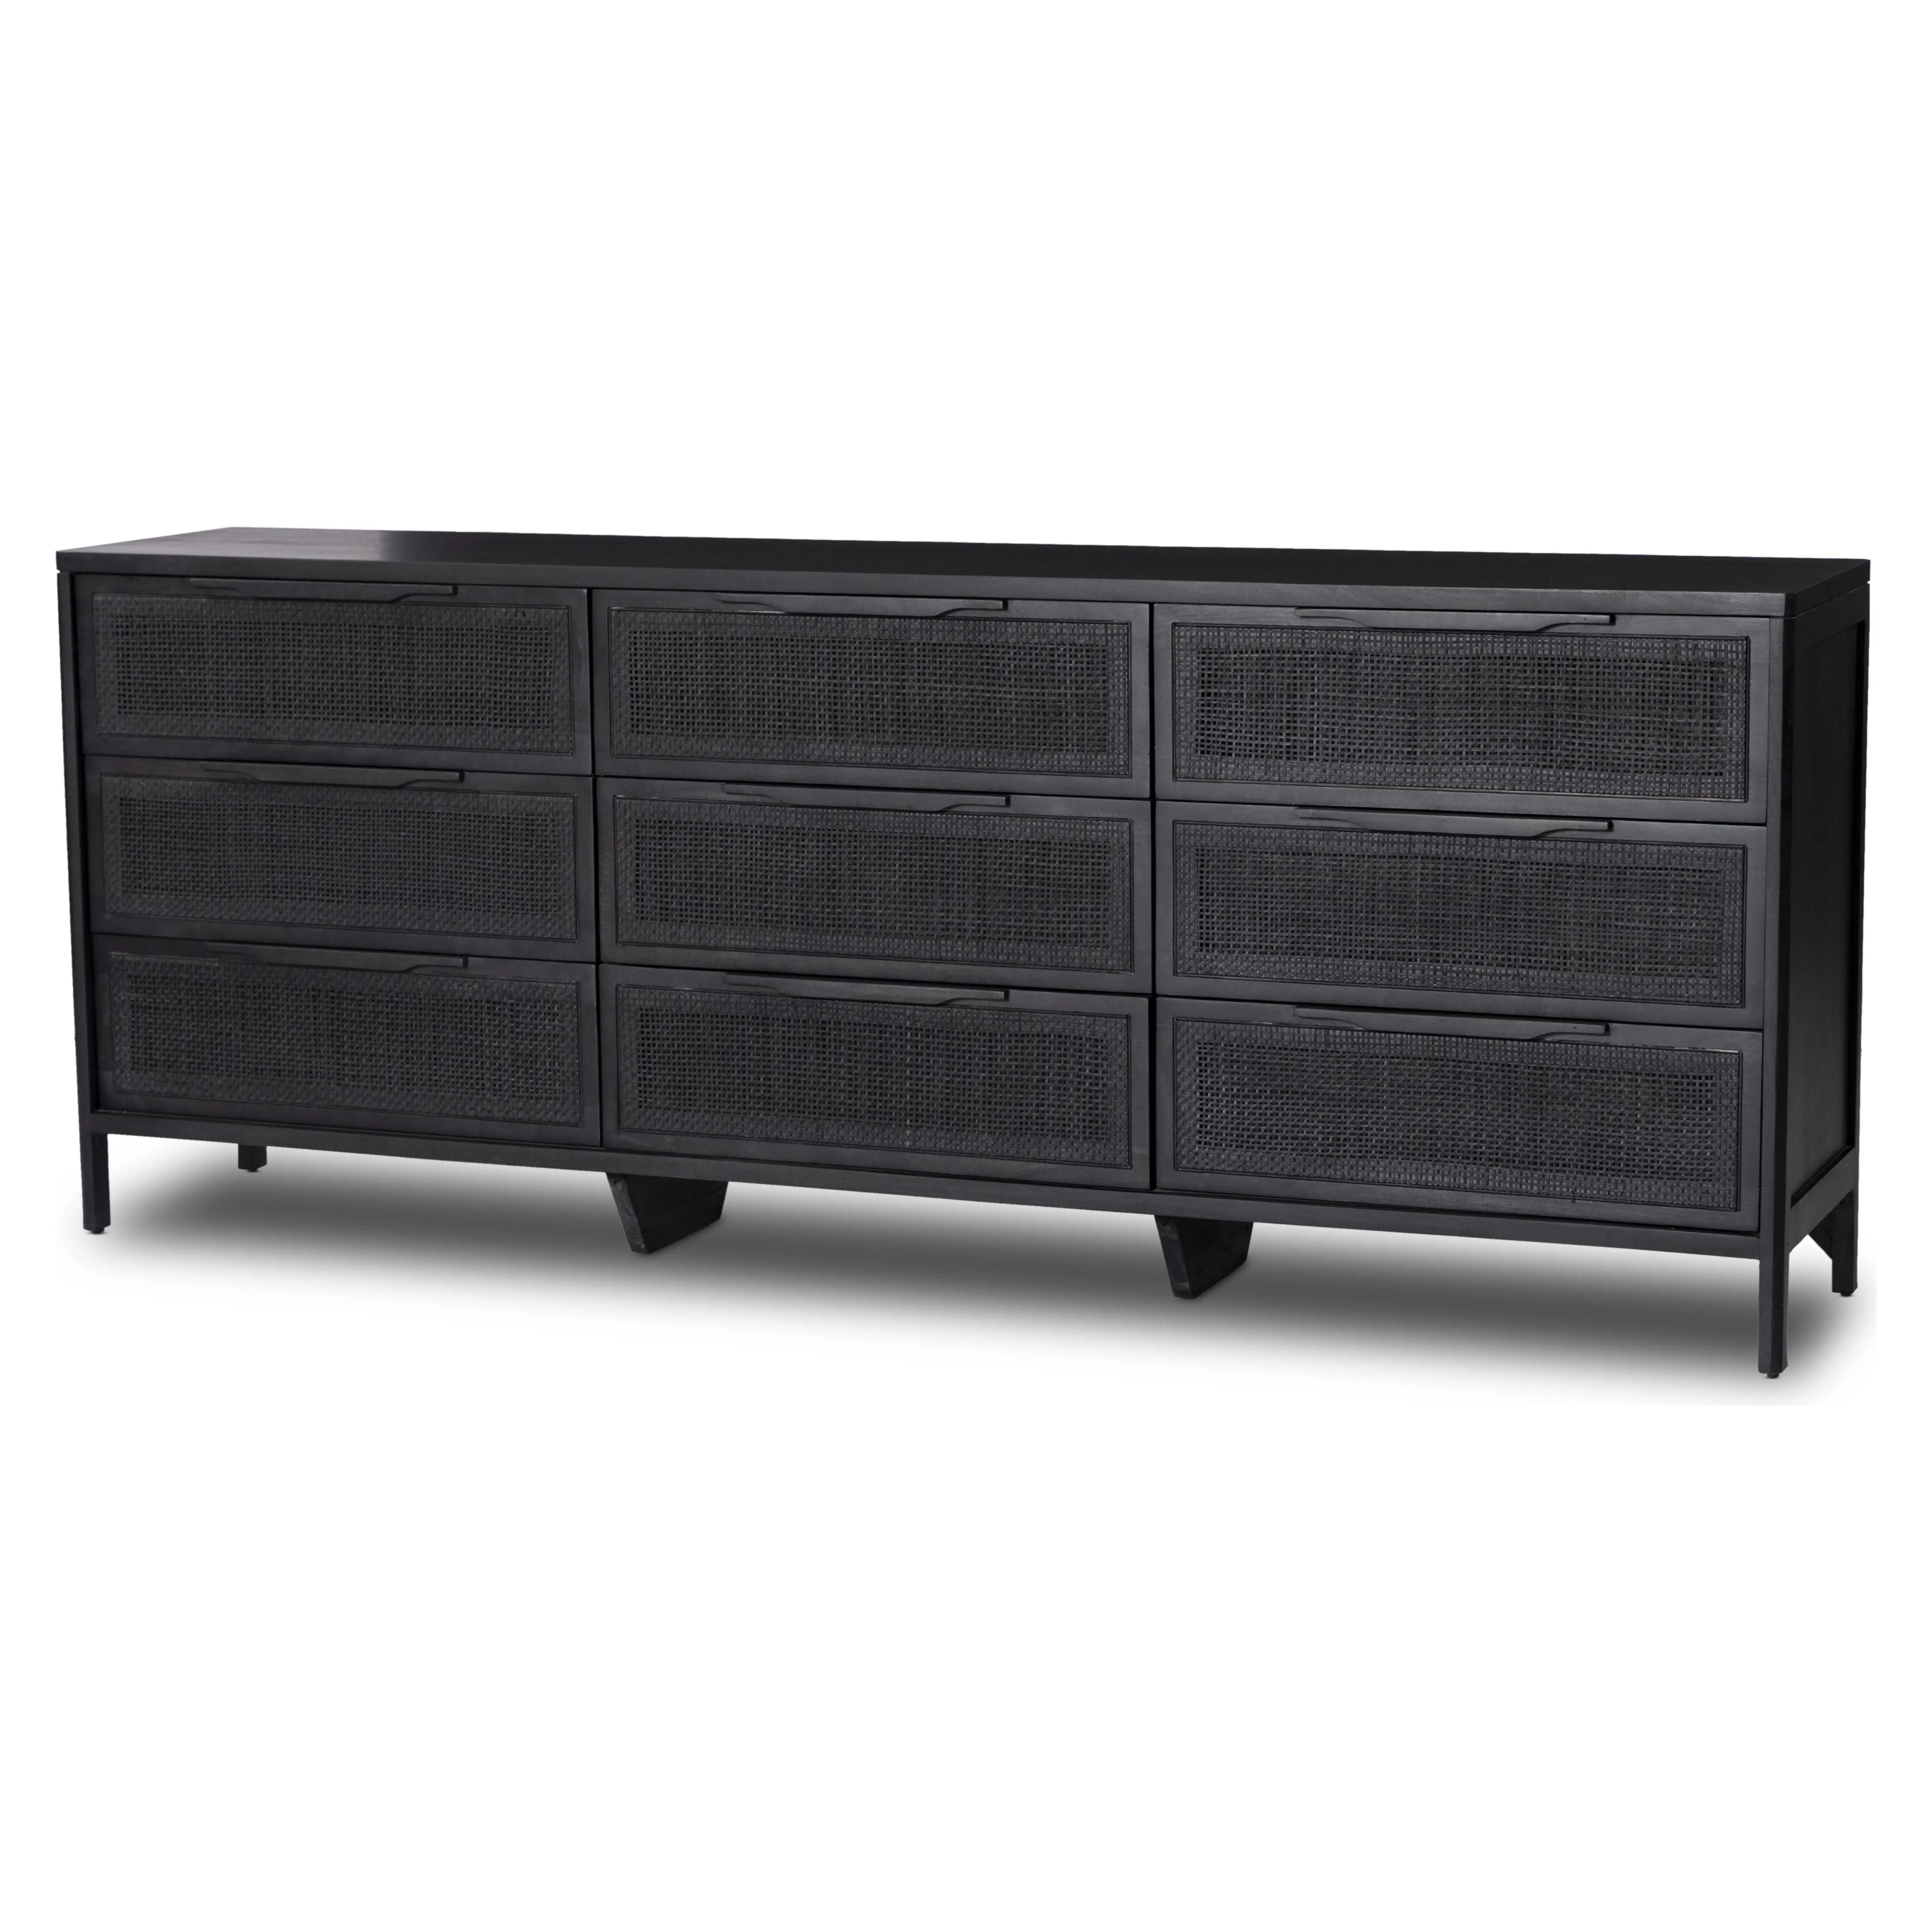 Black-finished mango encases nine spacious drawers of woven black cane, for a textural, monochromatic look Amethyst Home provides interior design, new home construction design consulting, vintage area rugs, and lighting in the San Diego metro area.